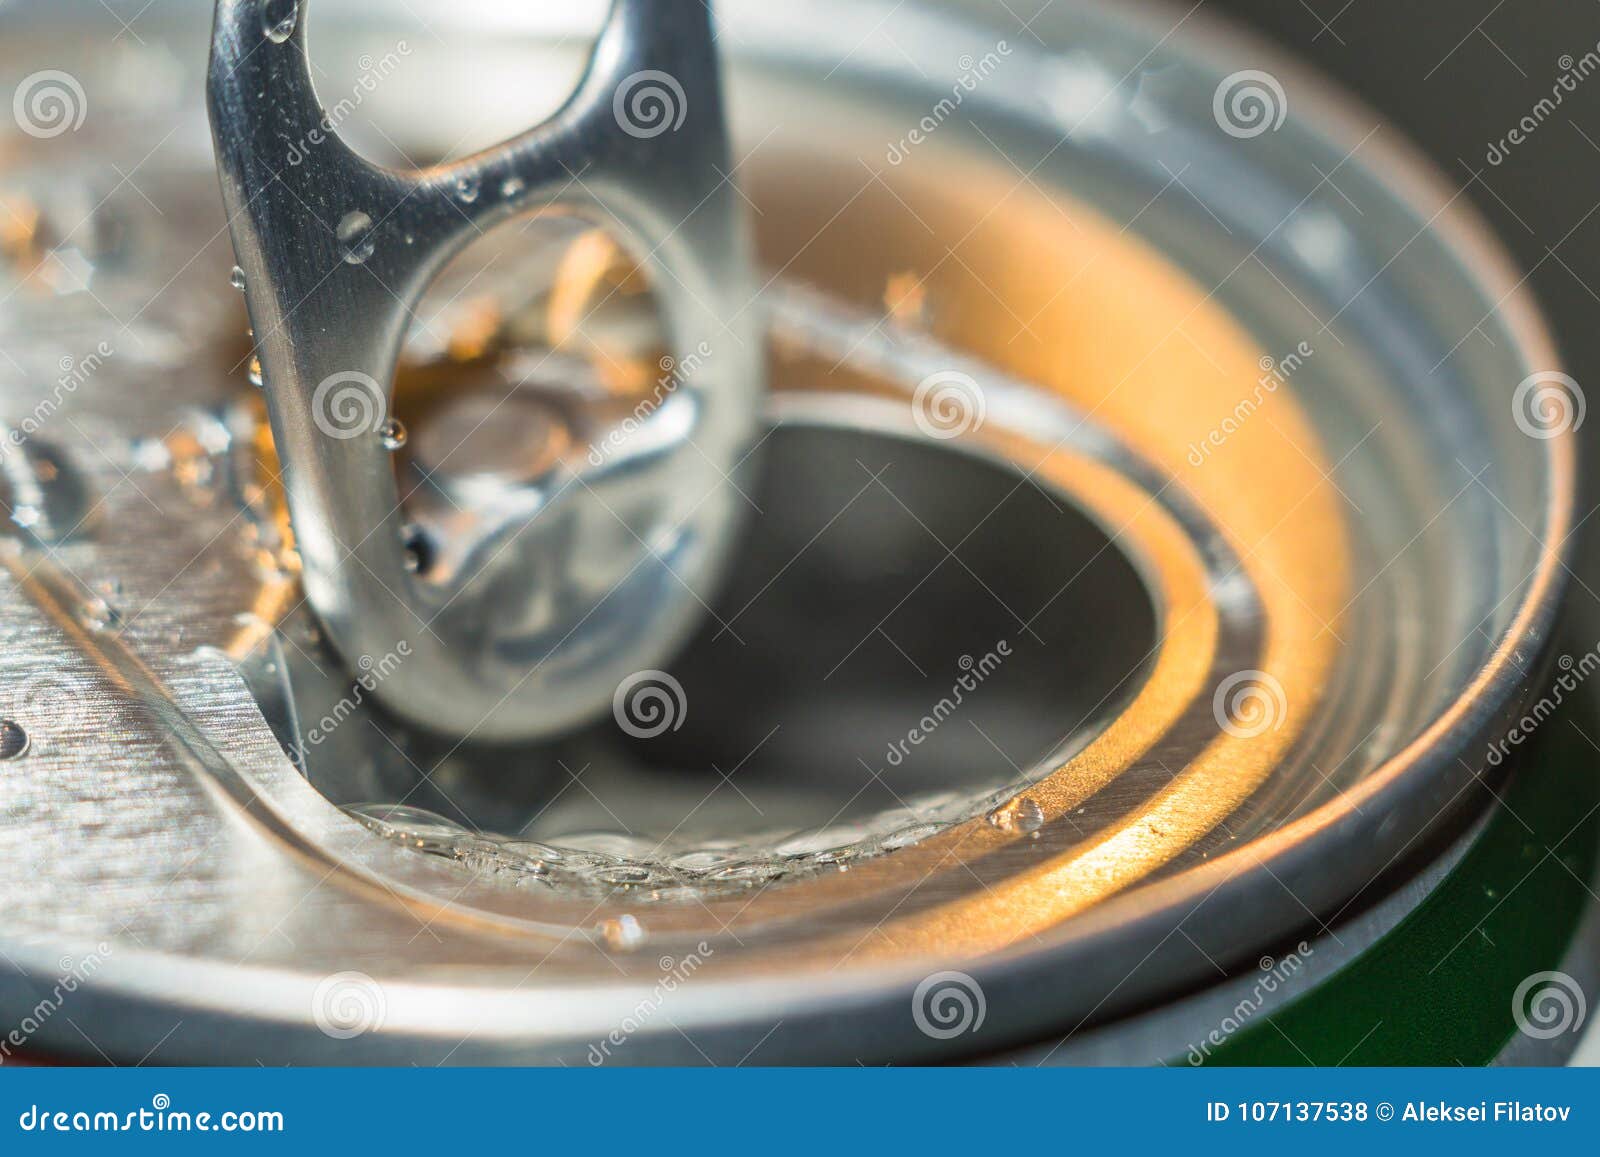 Open beer close-up stock photo. Image of action, dinner ...